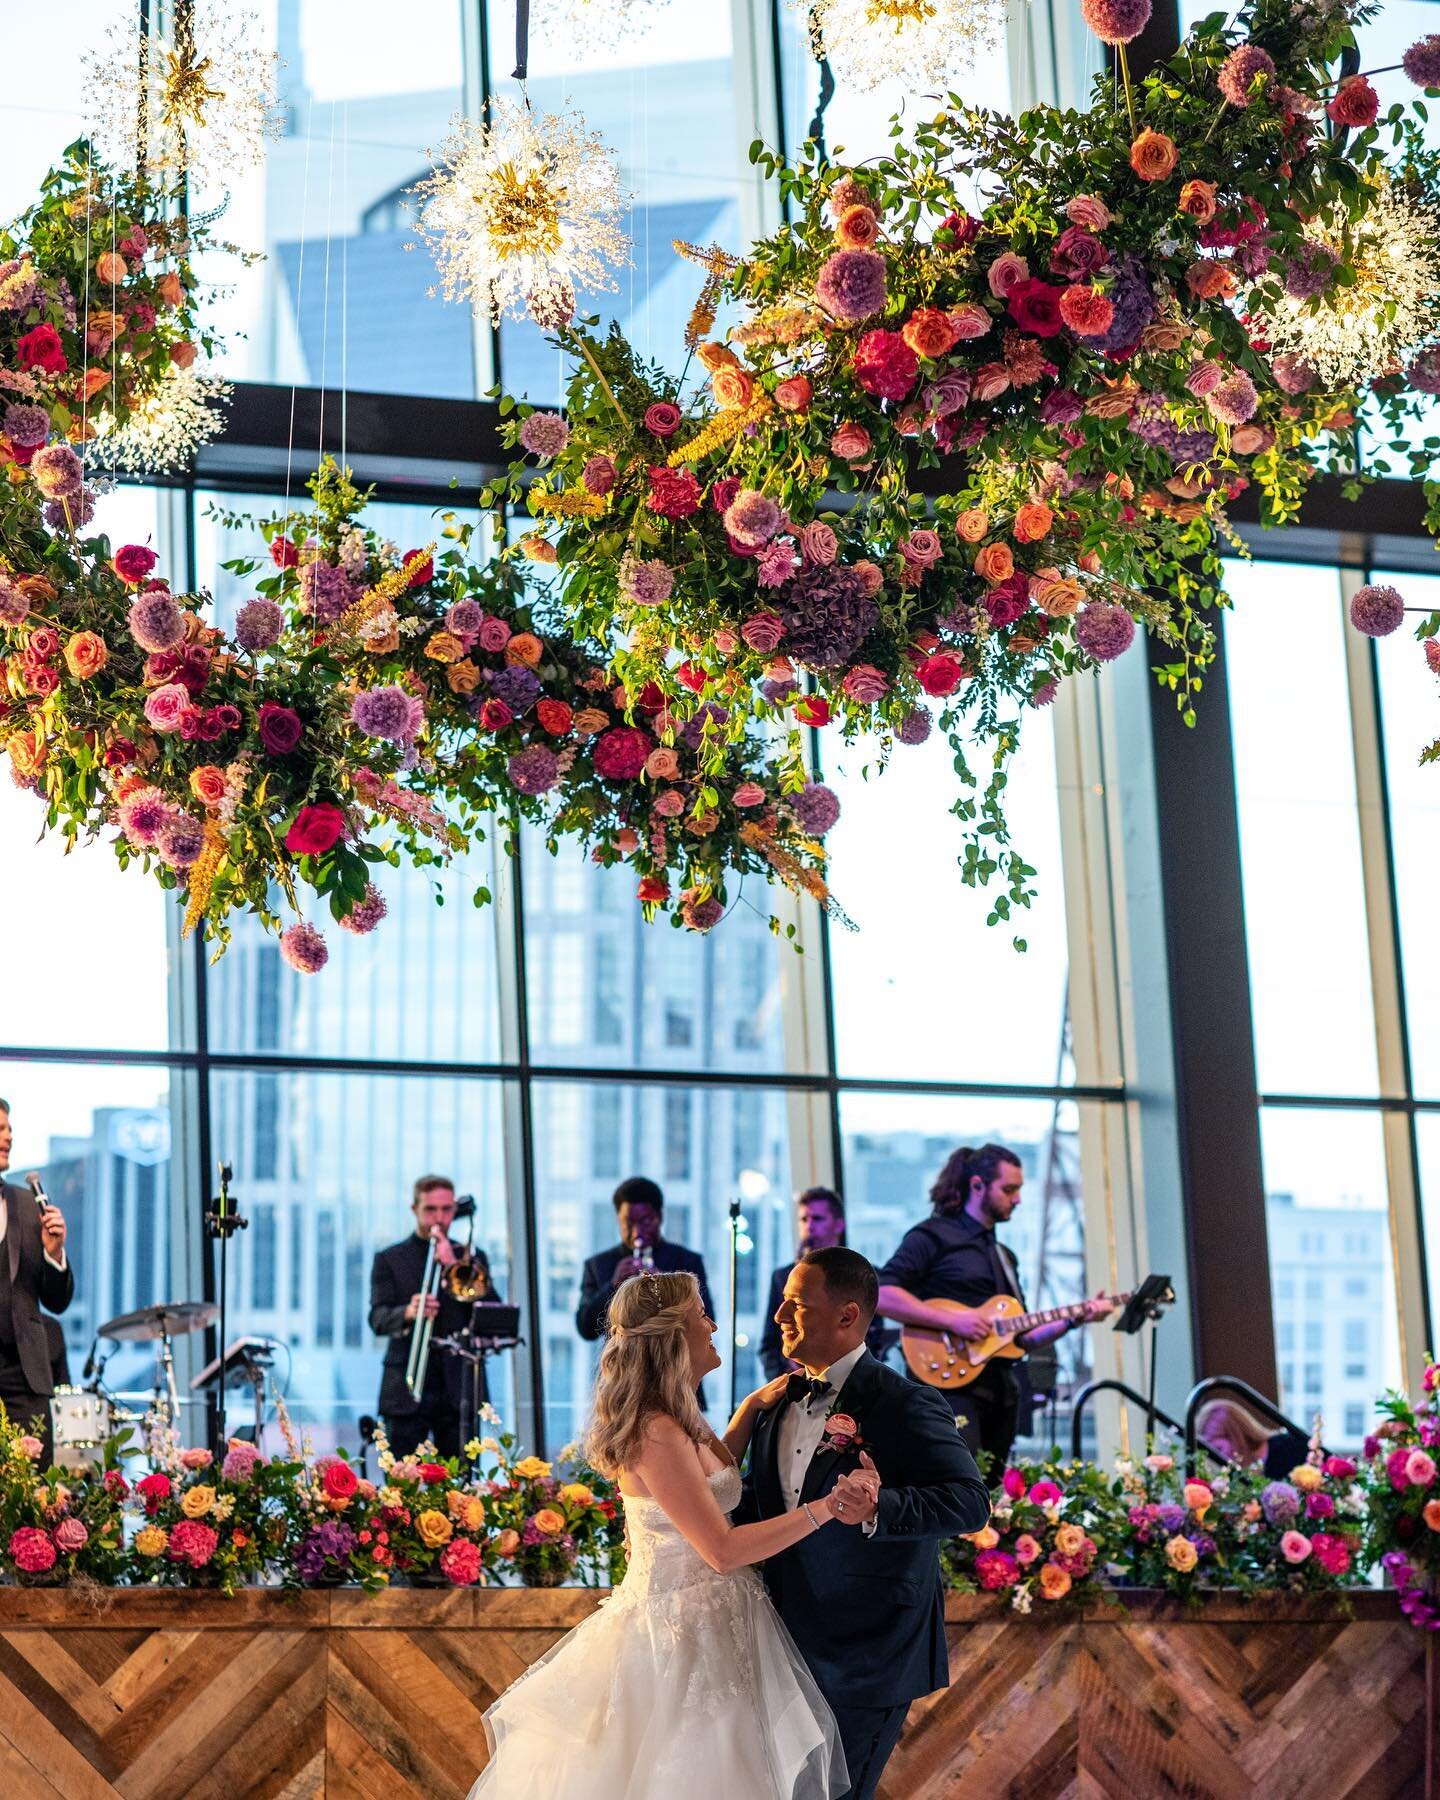 It&rsquo;s the Batman building in the back for me.  Okay, and maybe it&rsquo;s also the bright color palette, the chandelier of flowers and stars, and the joyful couple too. 

Planner: @erinlynnevents 
Photographer: @kathythomasphoto 
Lighting: @na